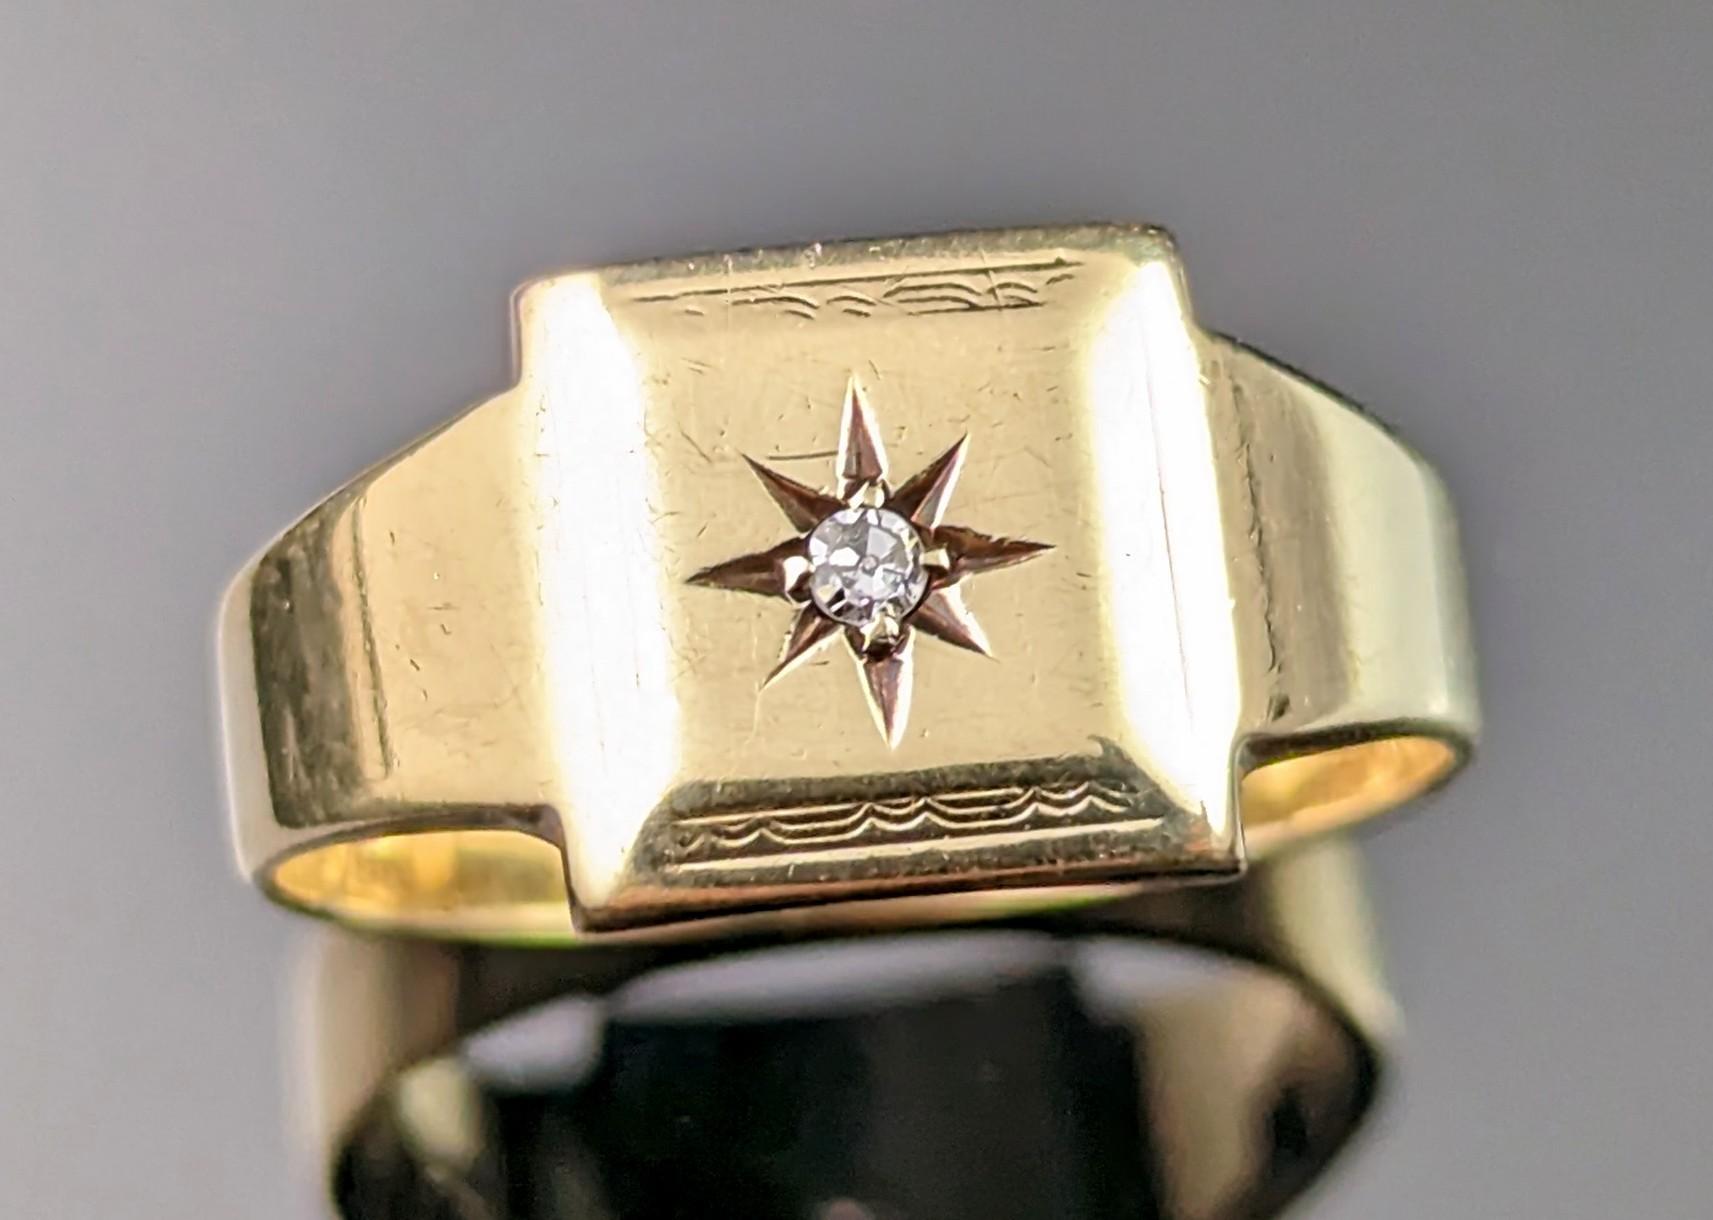 This vintage Art Deco era 9ct yellow gold Diamond signet ring is simply lush!

The perfect pinky ring rich yellow gold with a squared face and a central star set white diamond approx 0.10ct.

The face has a lightly engraved border but some of this